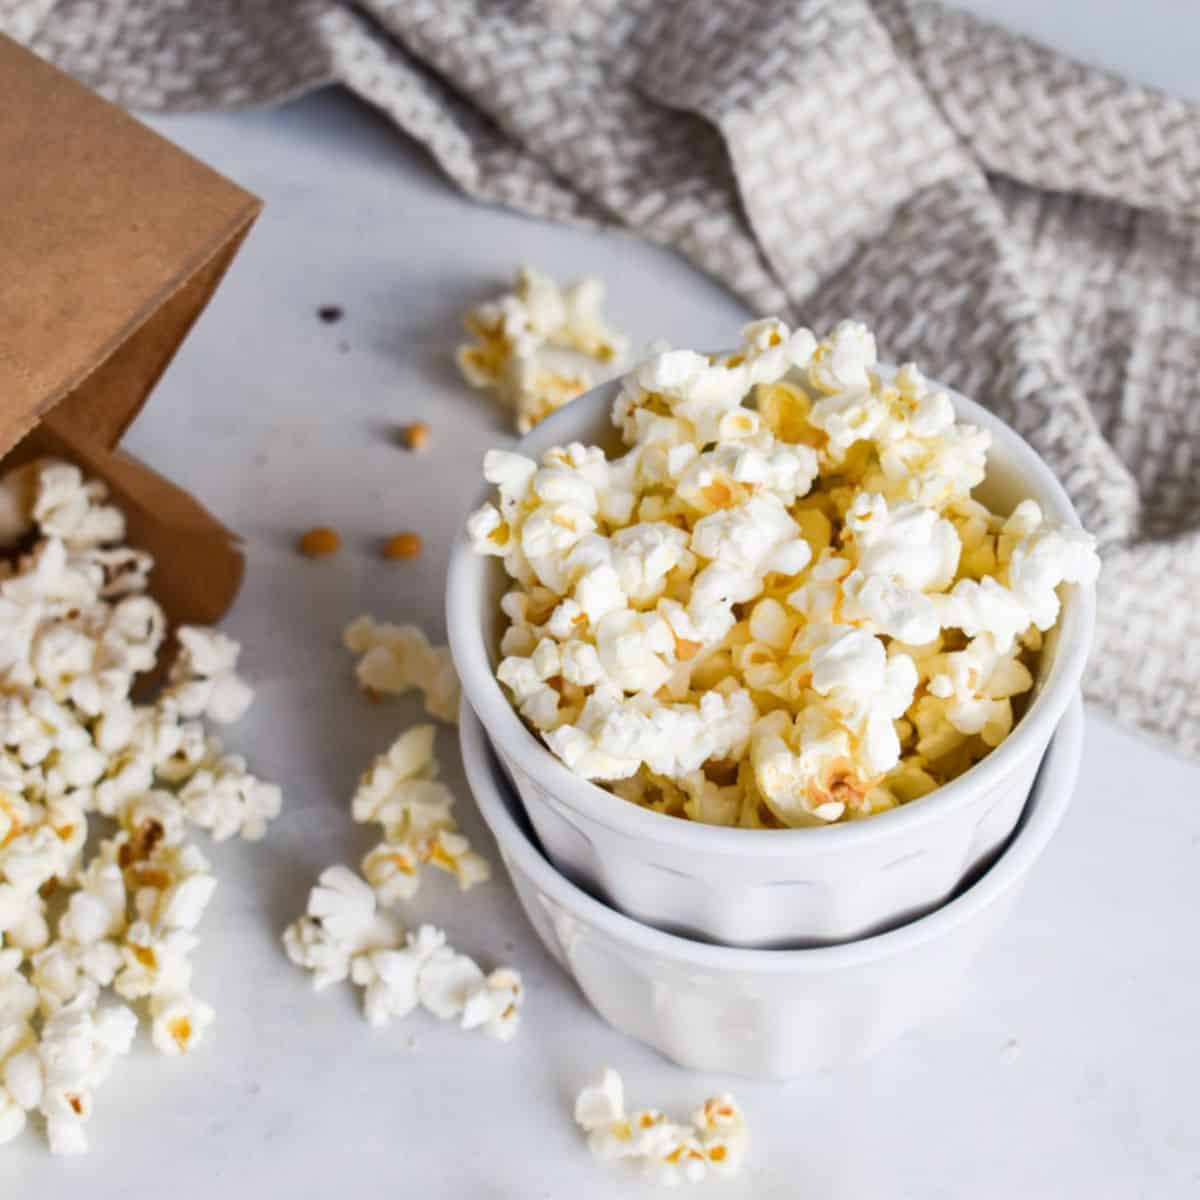 white cups filled with popcorn next to a brown paper bag with popcorn spilling out.